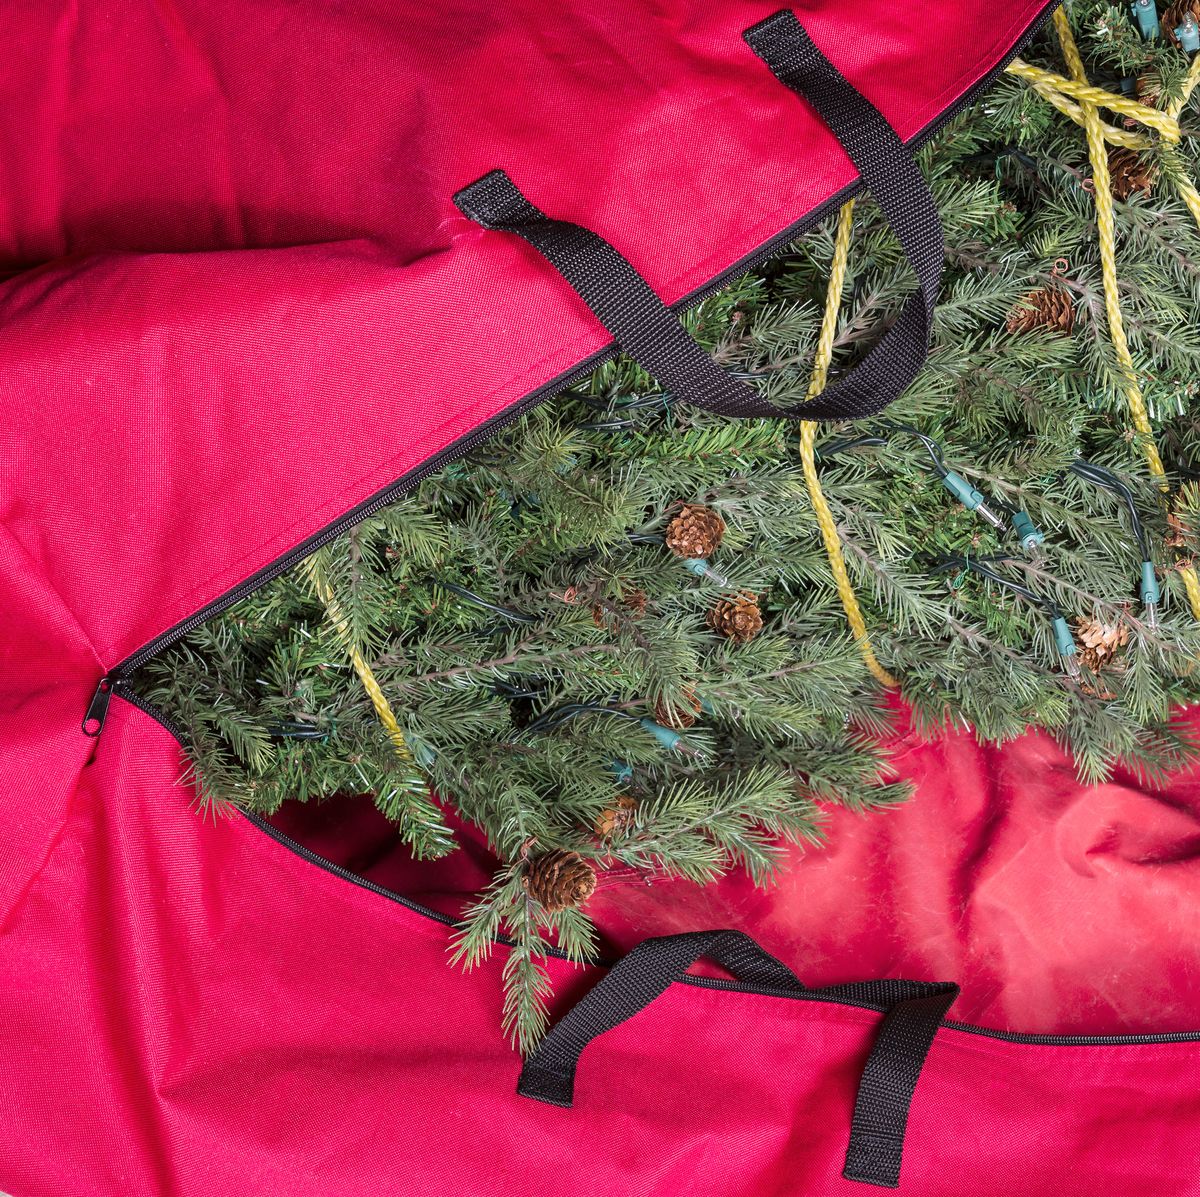 large artificial christmas tree being placed in red nylon zipper bag